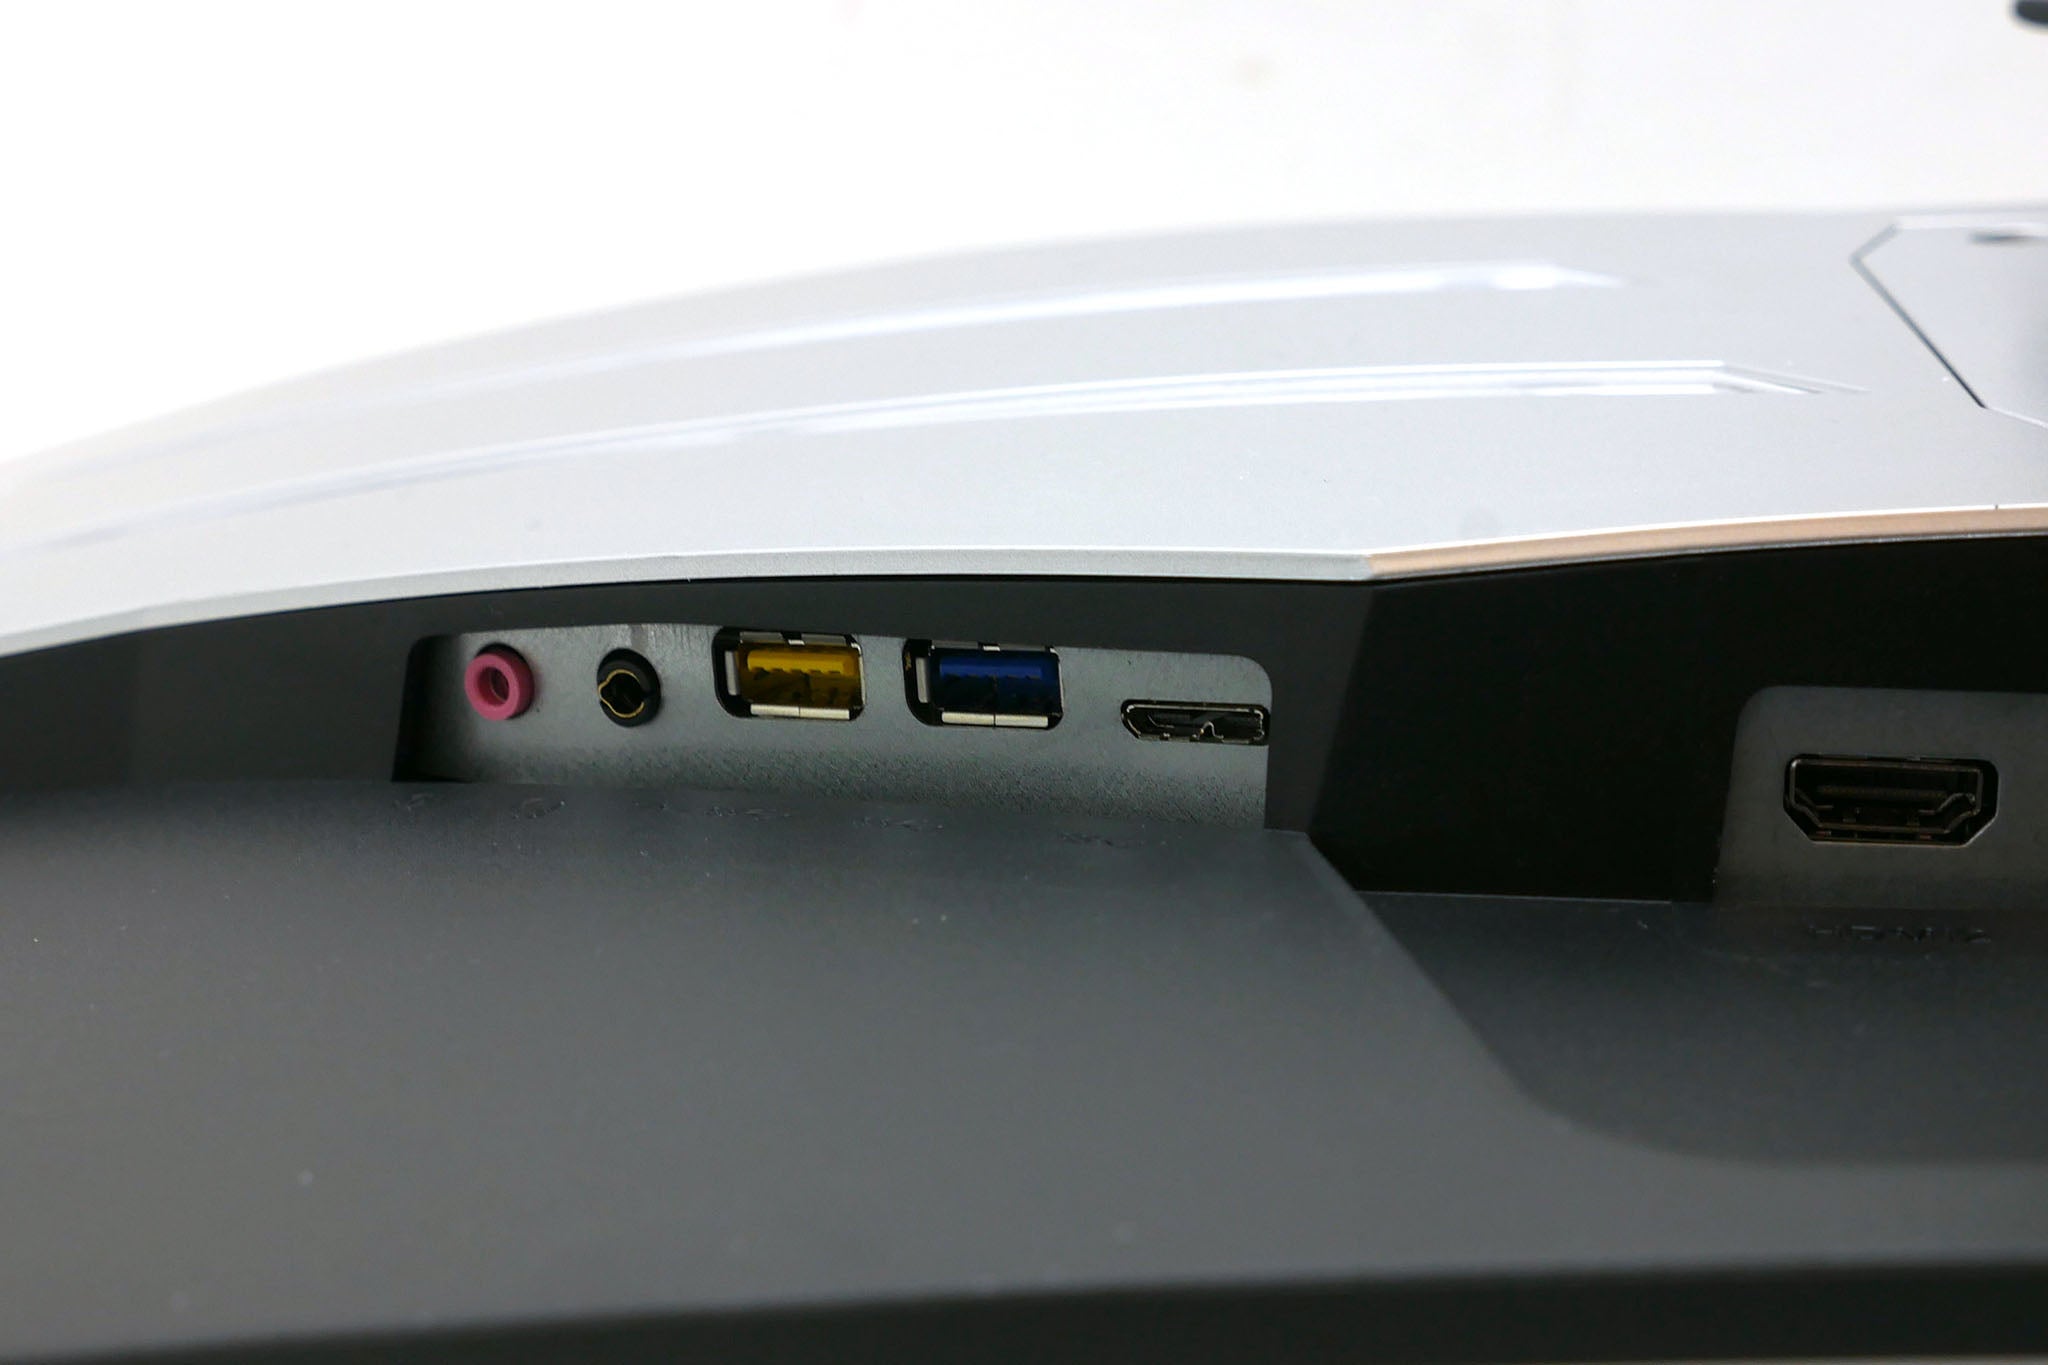 Close-up of AOC monitor's connectivity ports.